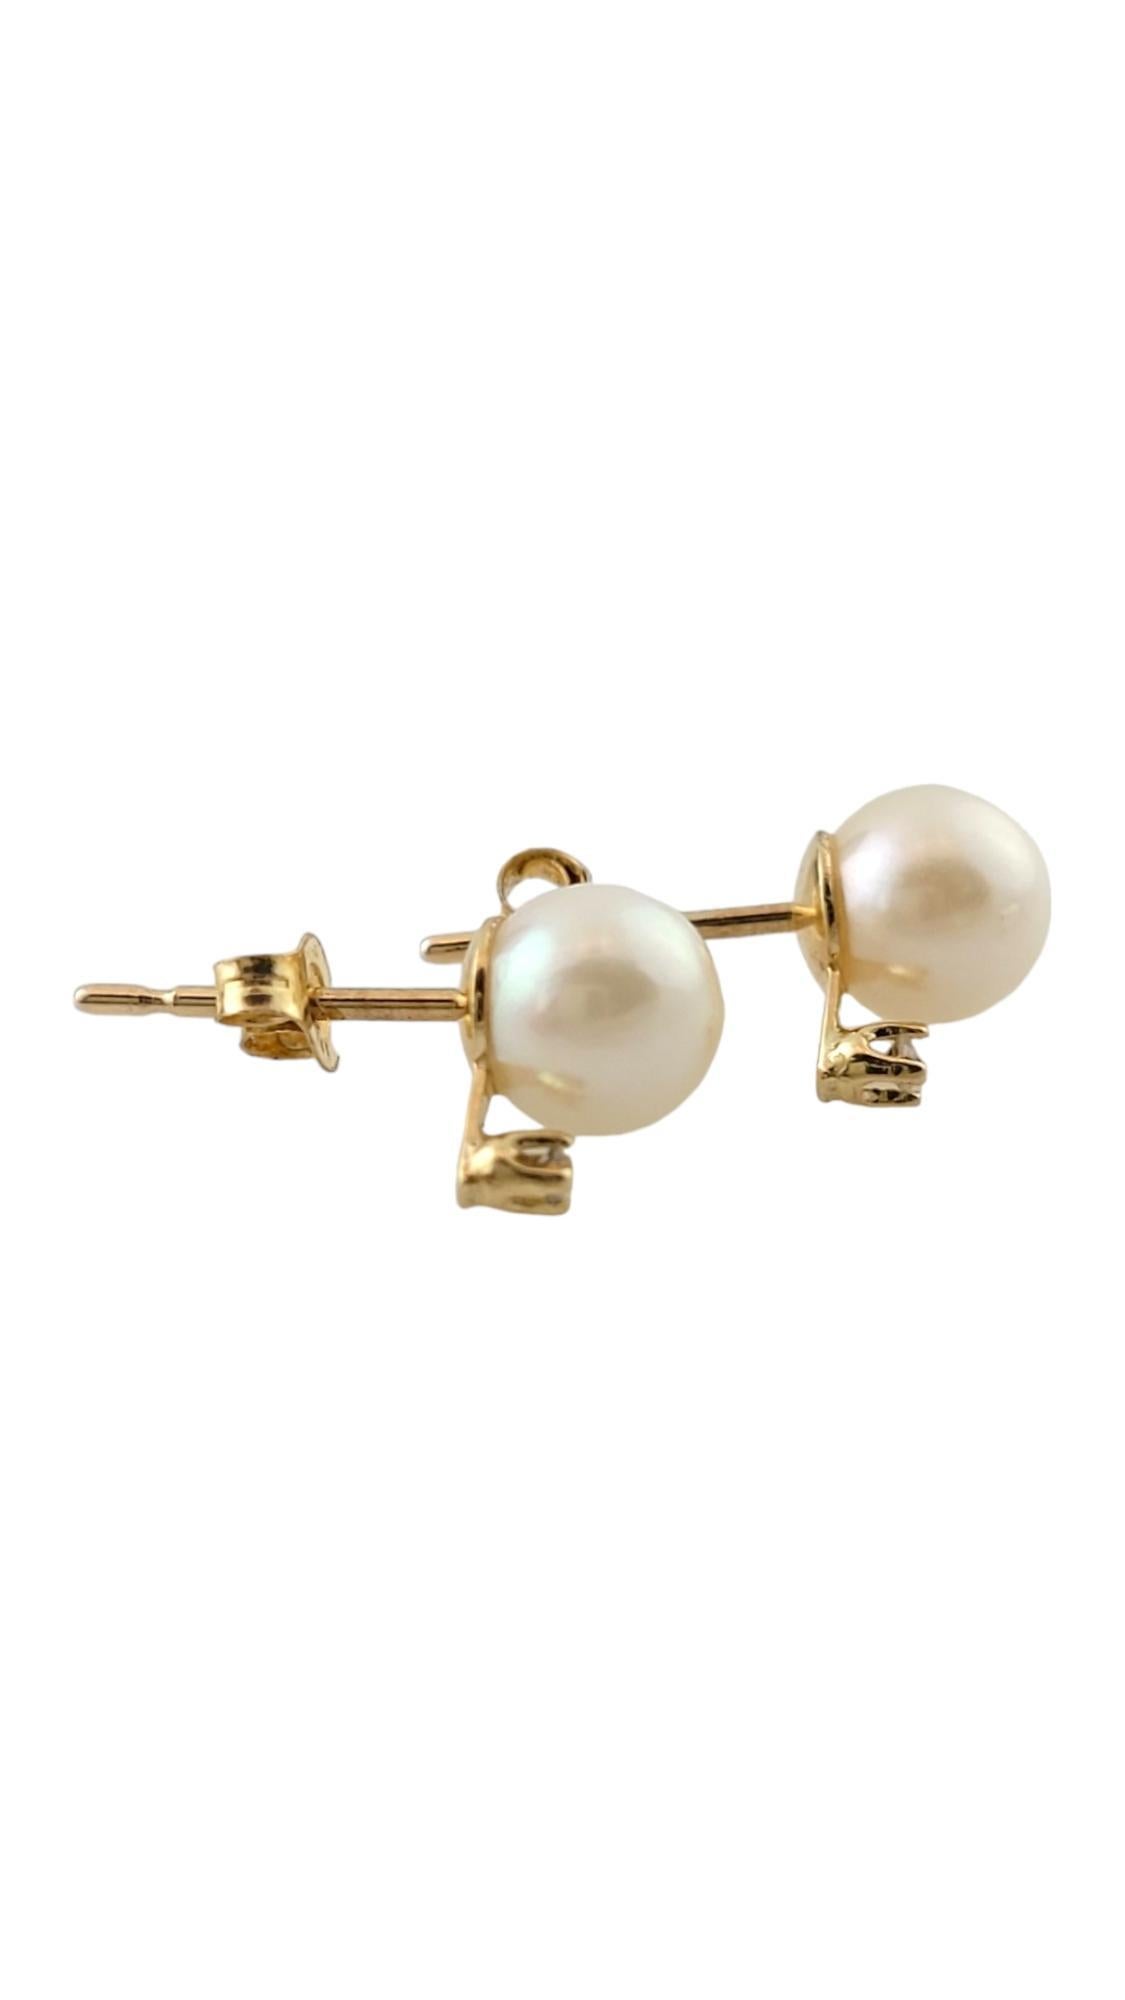 Vintage 14K Yellow Gold Pearl and Diamond Earrings

These beautiful pearl earrings also feature 2 sparkling round brilliant cut diamonds for an extra shine!

Pearls: 5.65mm each

Approximate total diamond weight: .02 cts

Diamond color: G

Diamond